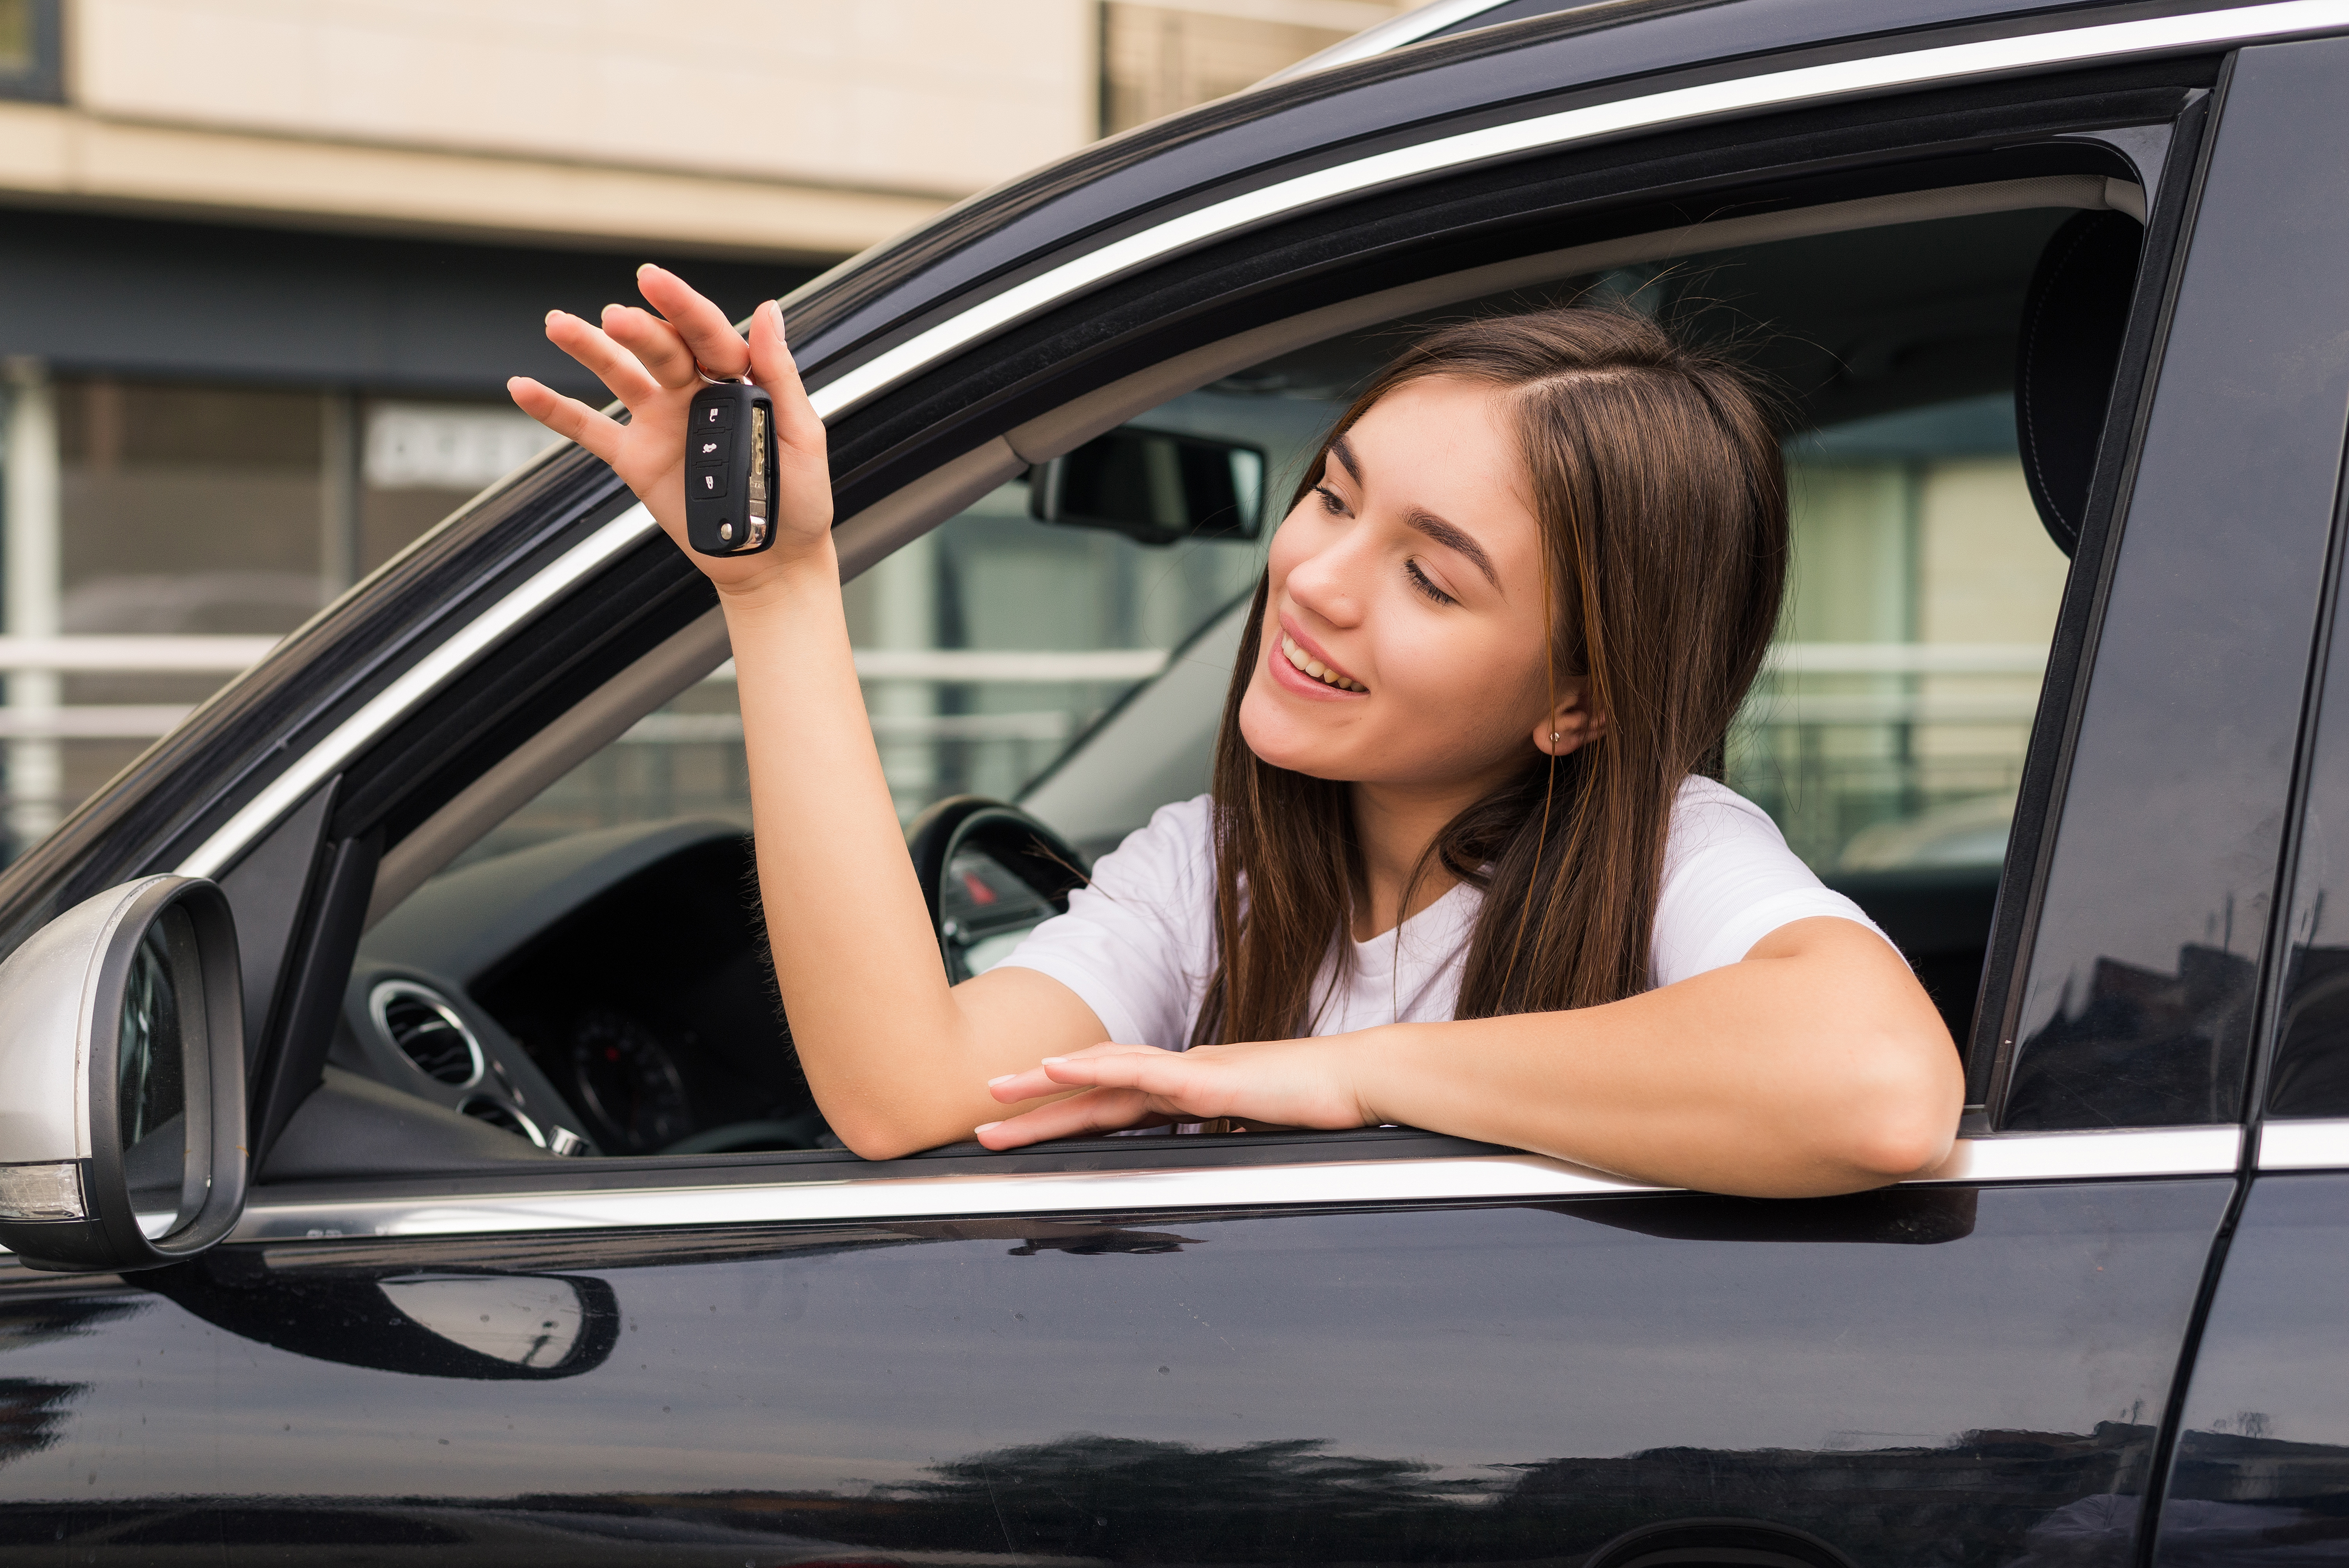 Happy young girl inside a car while holding up her car keys | Source: Freepik